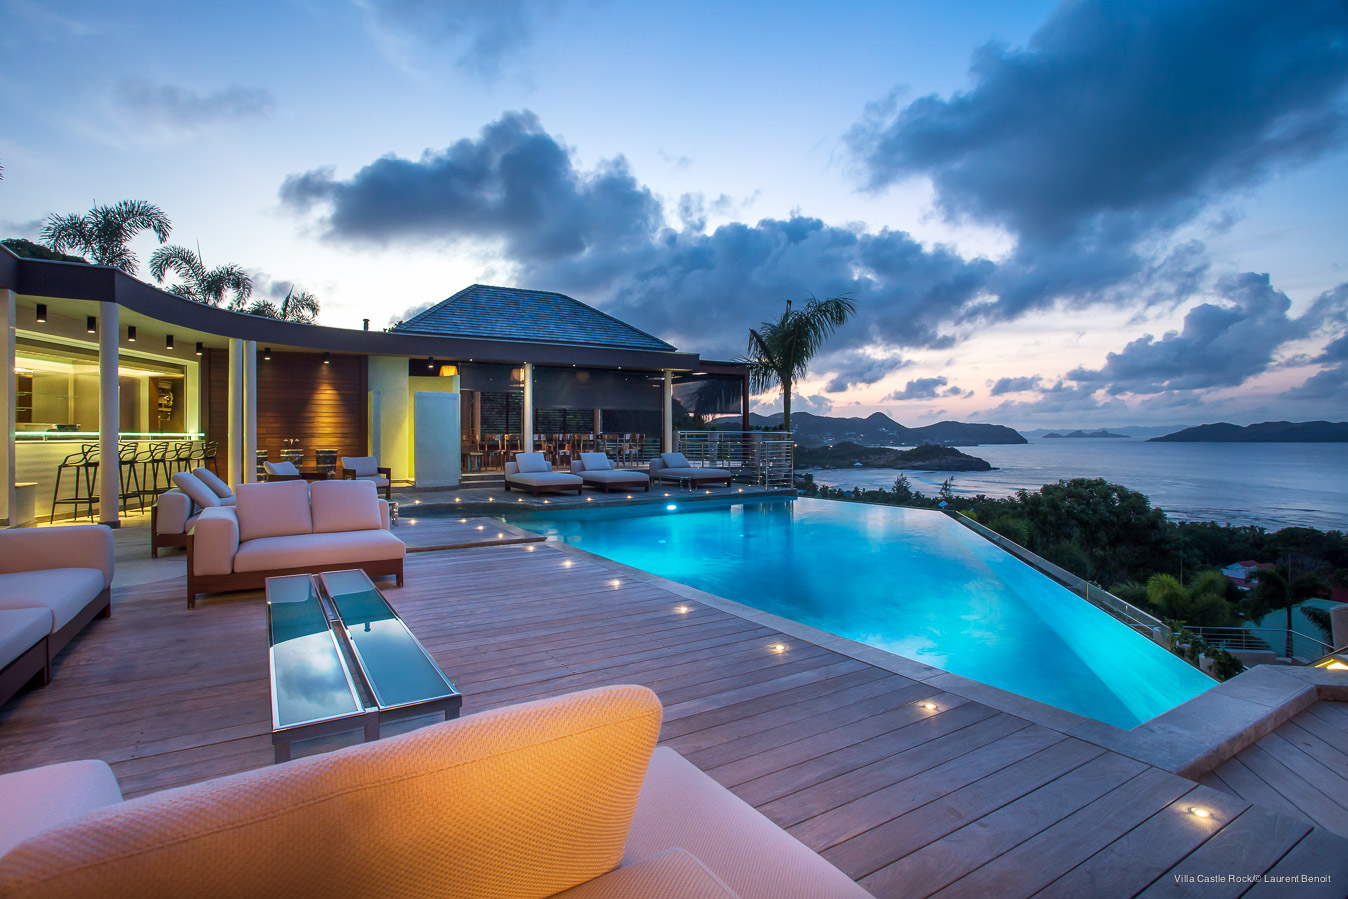 Spacious luxury villa St Barths offers ultimate privacy